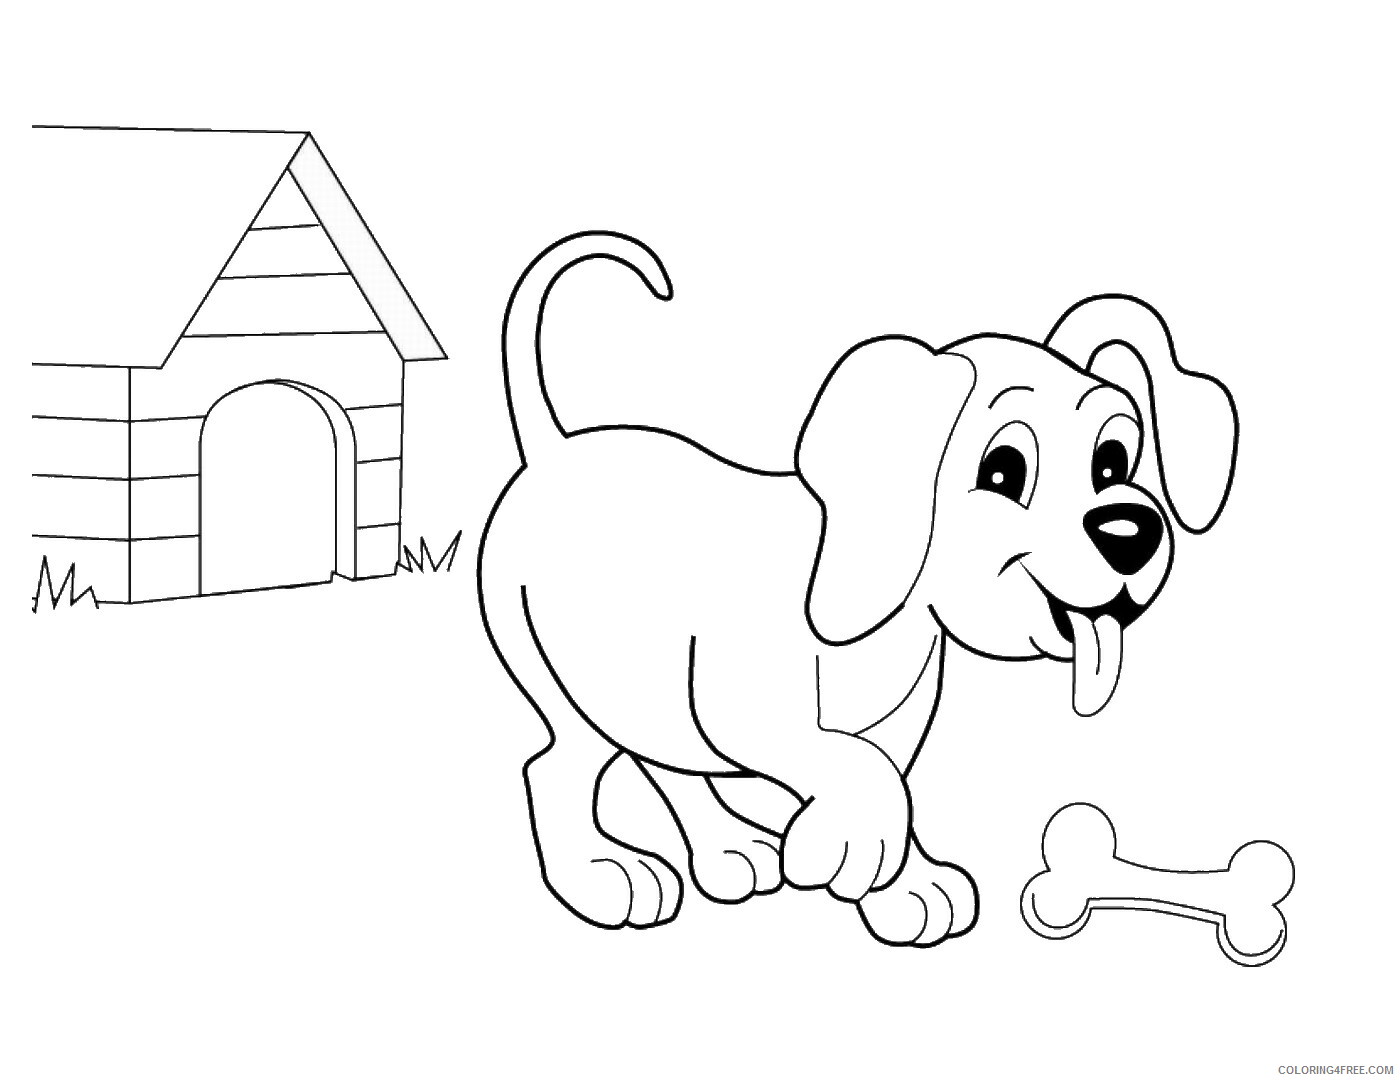 Dogs Coloring Pages Animal Printable Sheets dog_31 2021 1557 Coloring4free